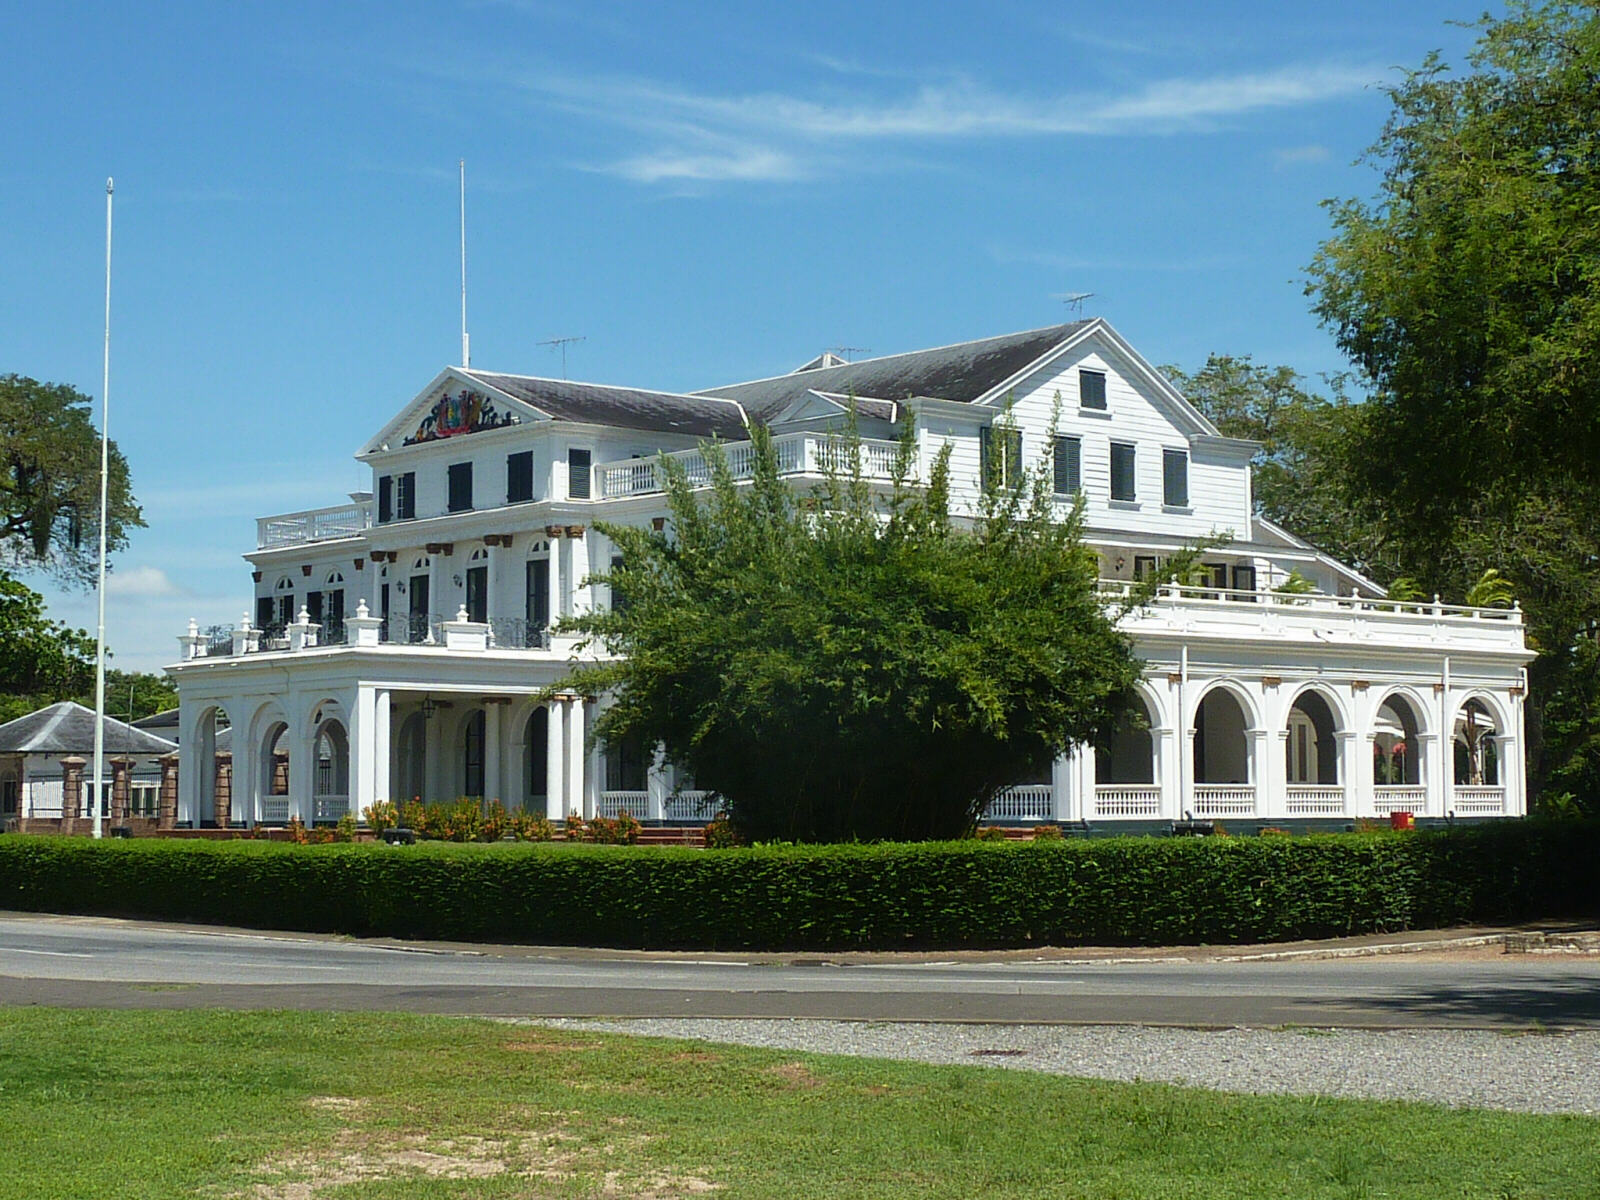 The President's palace in Independence Square, Paramaribo